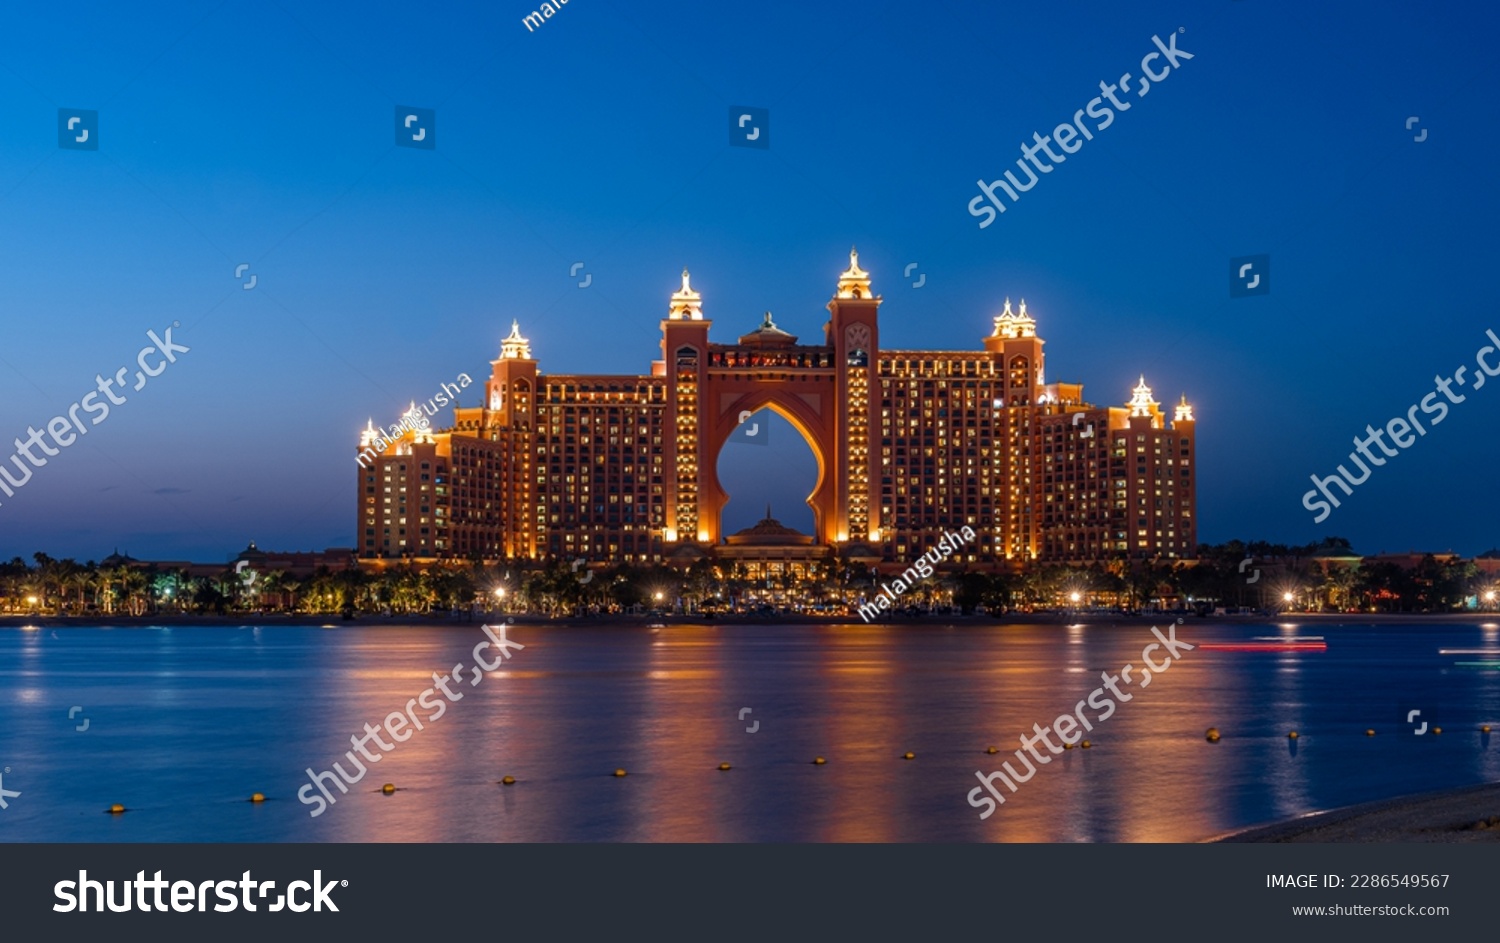 Experience the magic of Dubai's Atlantis hotel at night with our stunning landscape photograph. The iconic hotel, located on the man-made island of Palm Jumeirah #2286549567